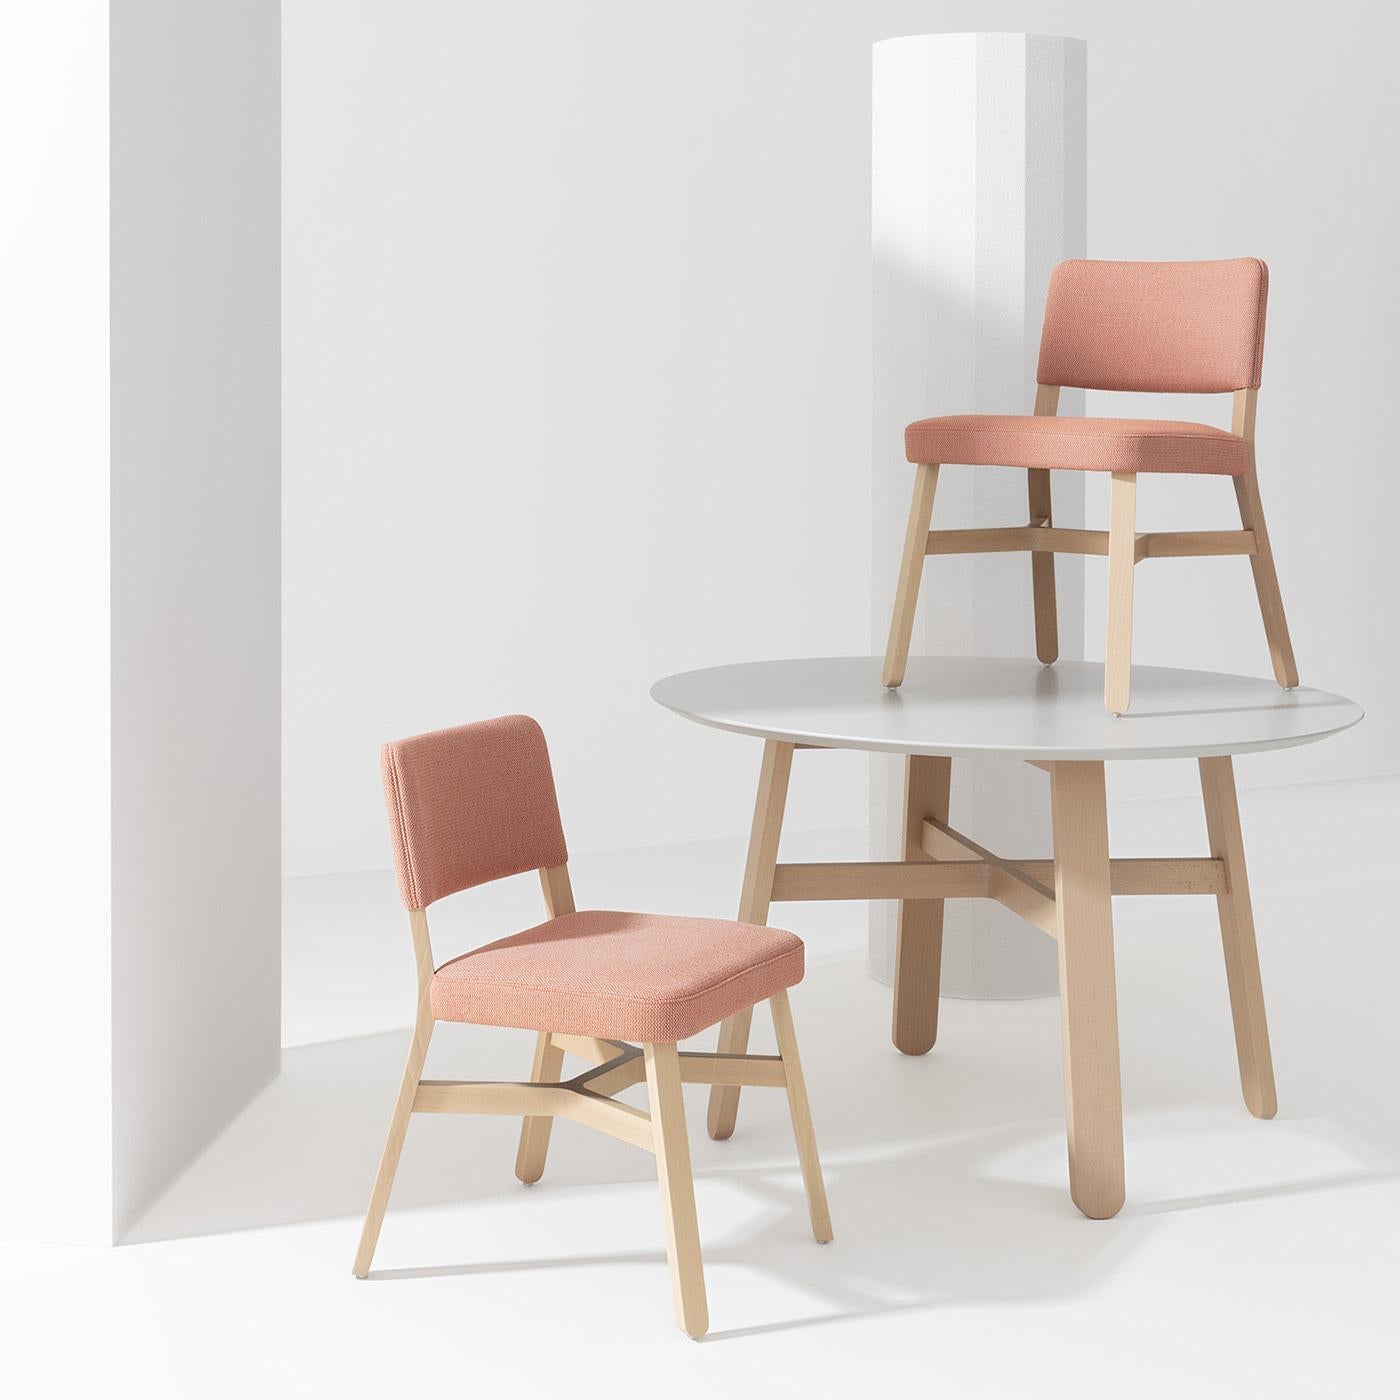 Showcasing the crossing structural element distinctive of the Croissant Collection, this exclusive beechwood chair designed by Emilio Nanni is a spot-on choice to add a pop of color to neutral-toned decors. The sleek frame is comprised of slender,